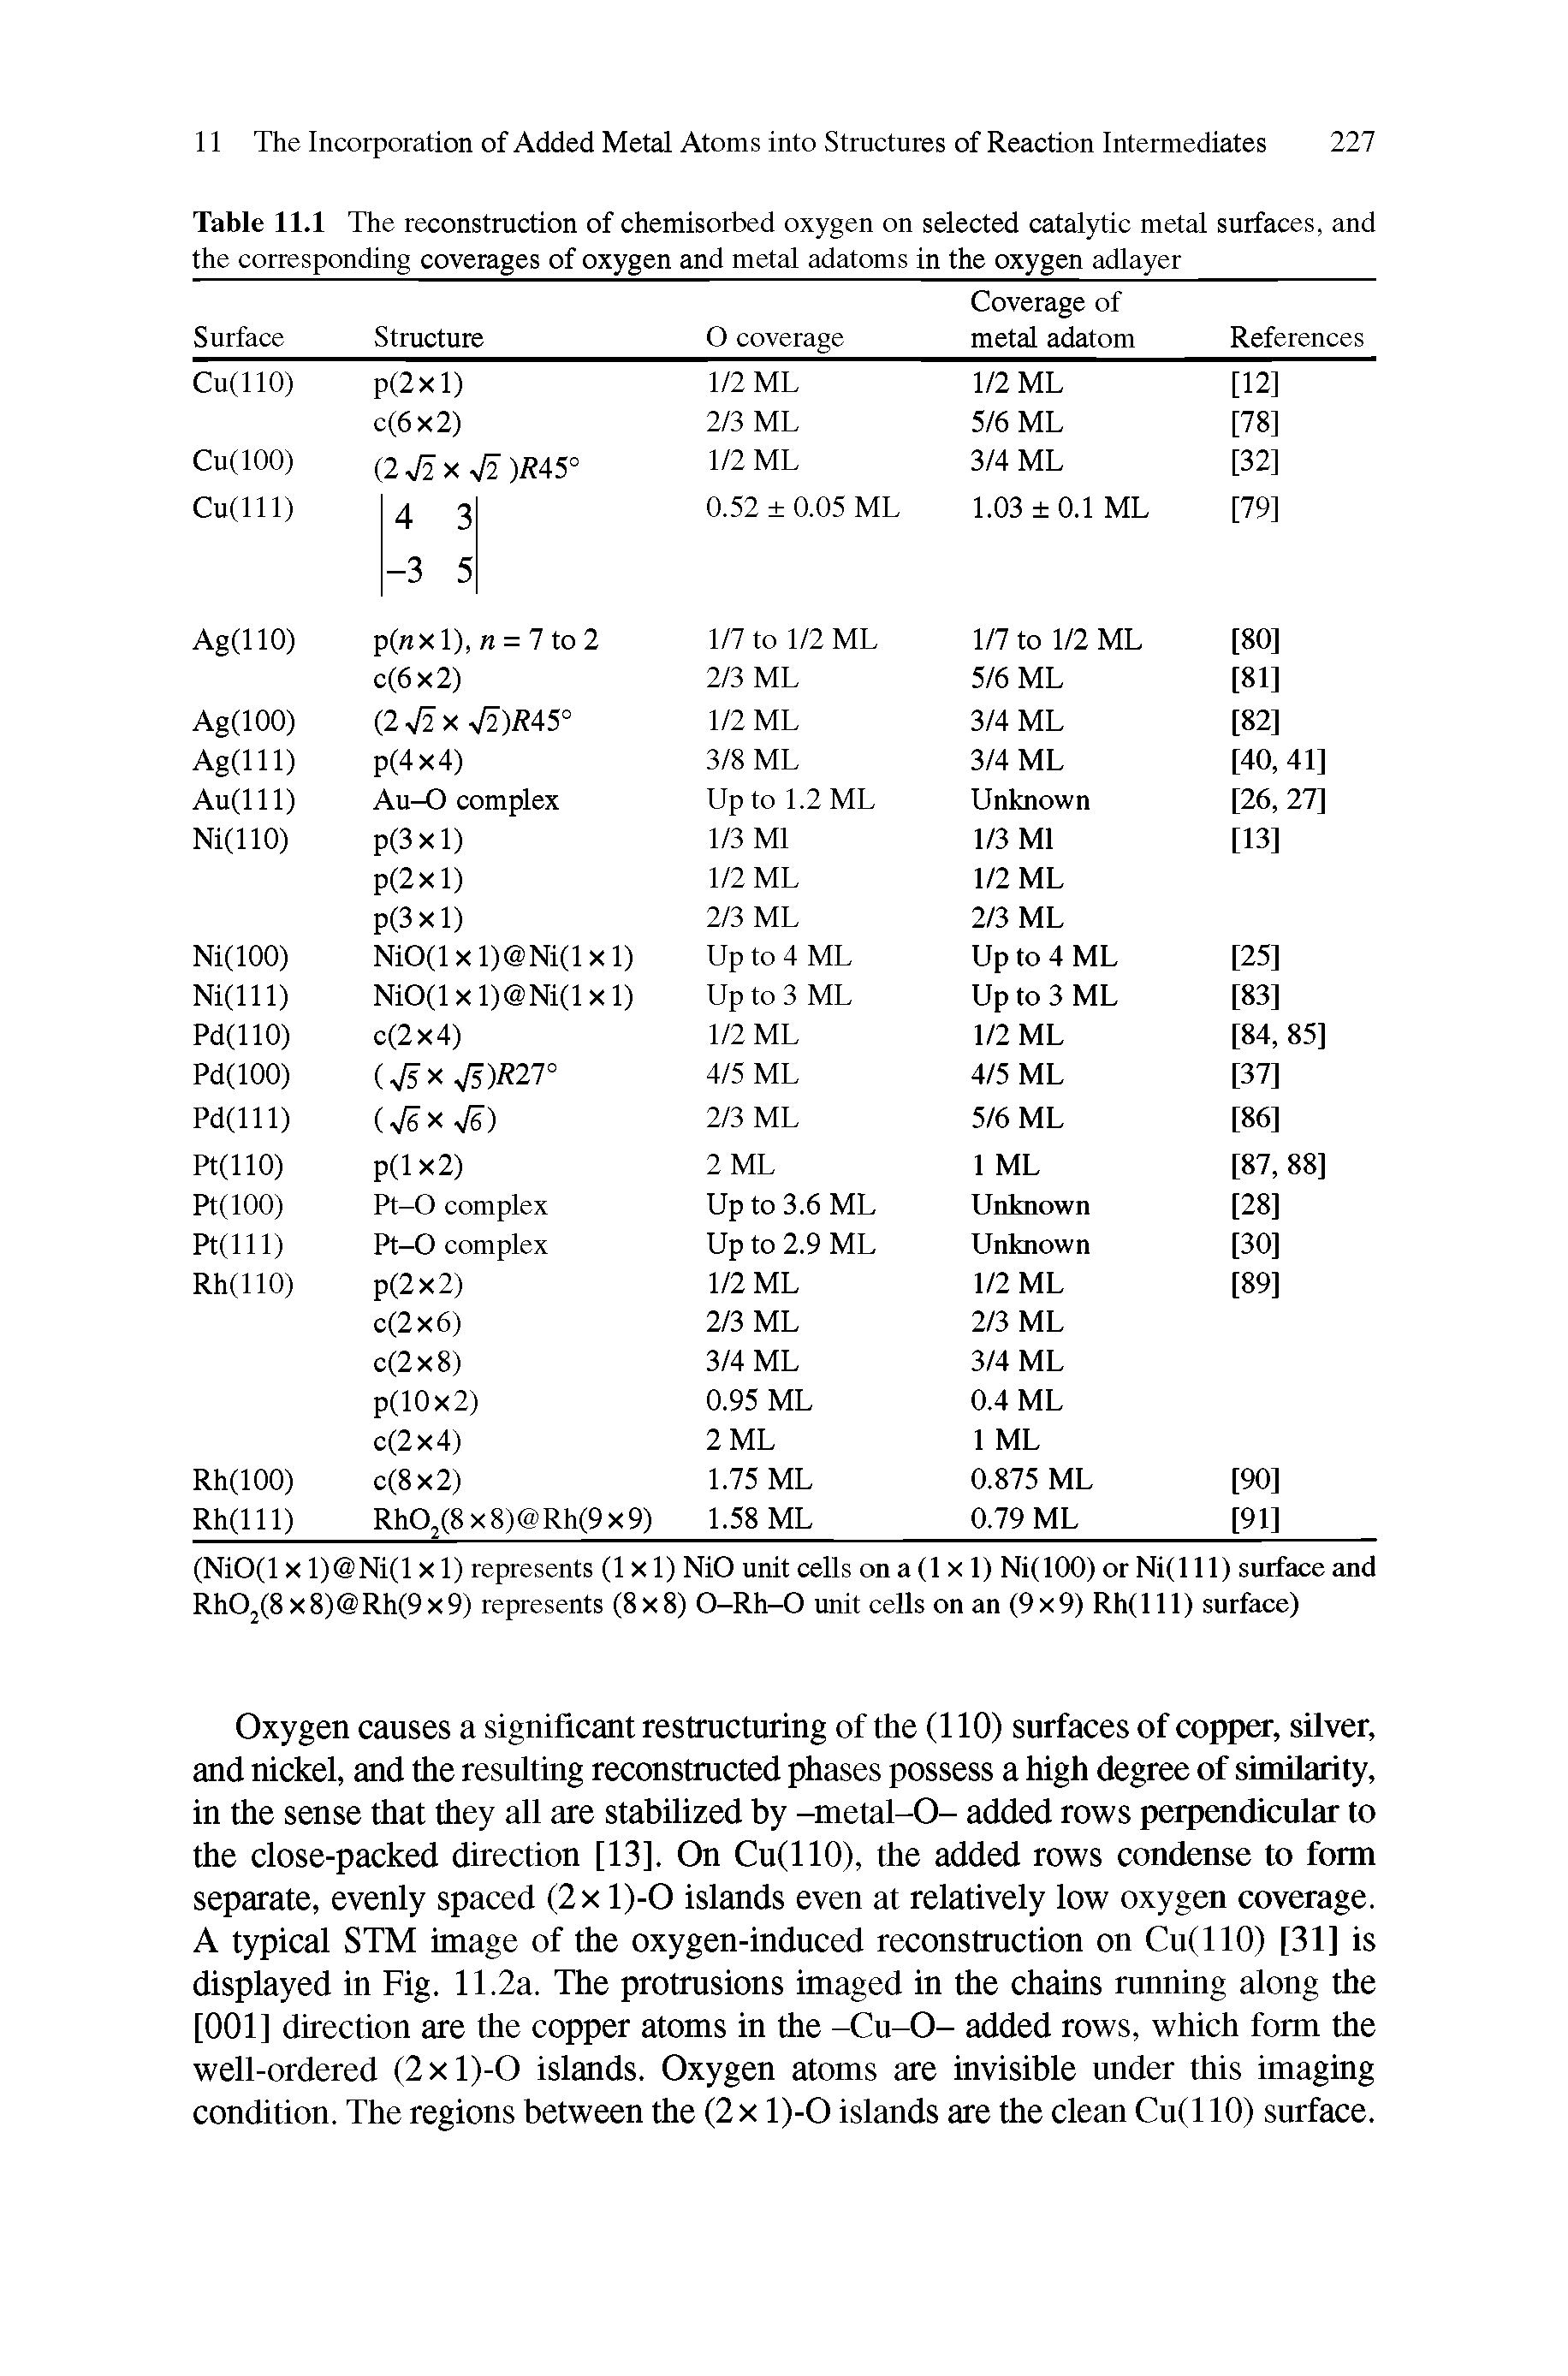 Table 11.1 The reconstruction of chemisorbed oxygen on selected catalytic metal surfaces, and the corresponding coverages of oxygen and metal adatoms in the oxygen adlayer...